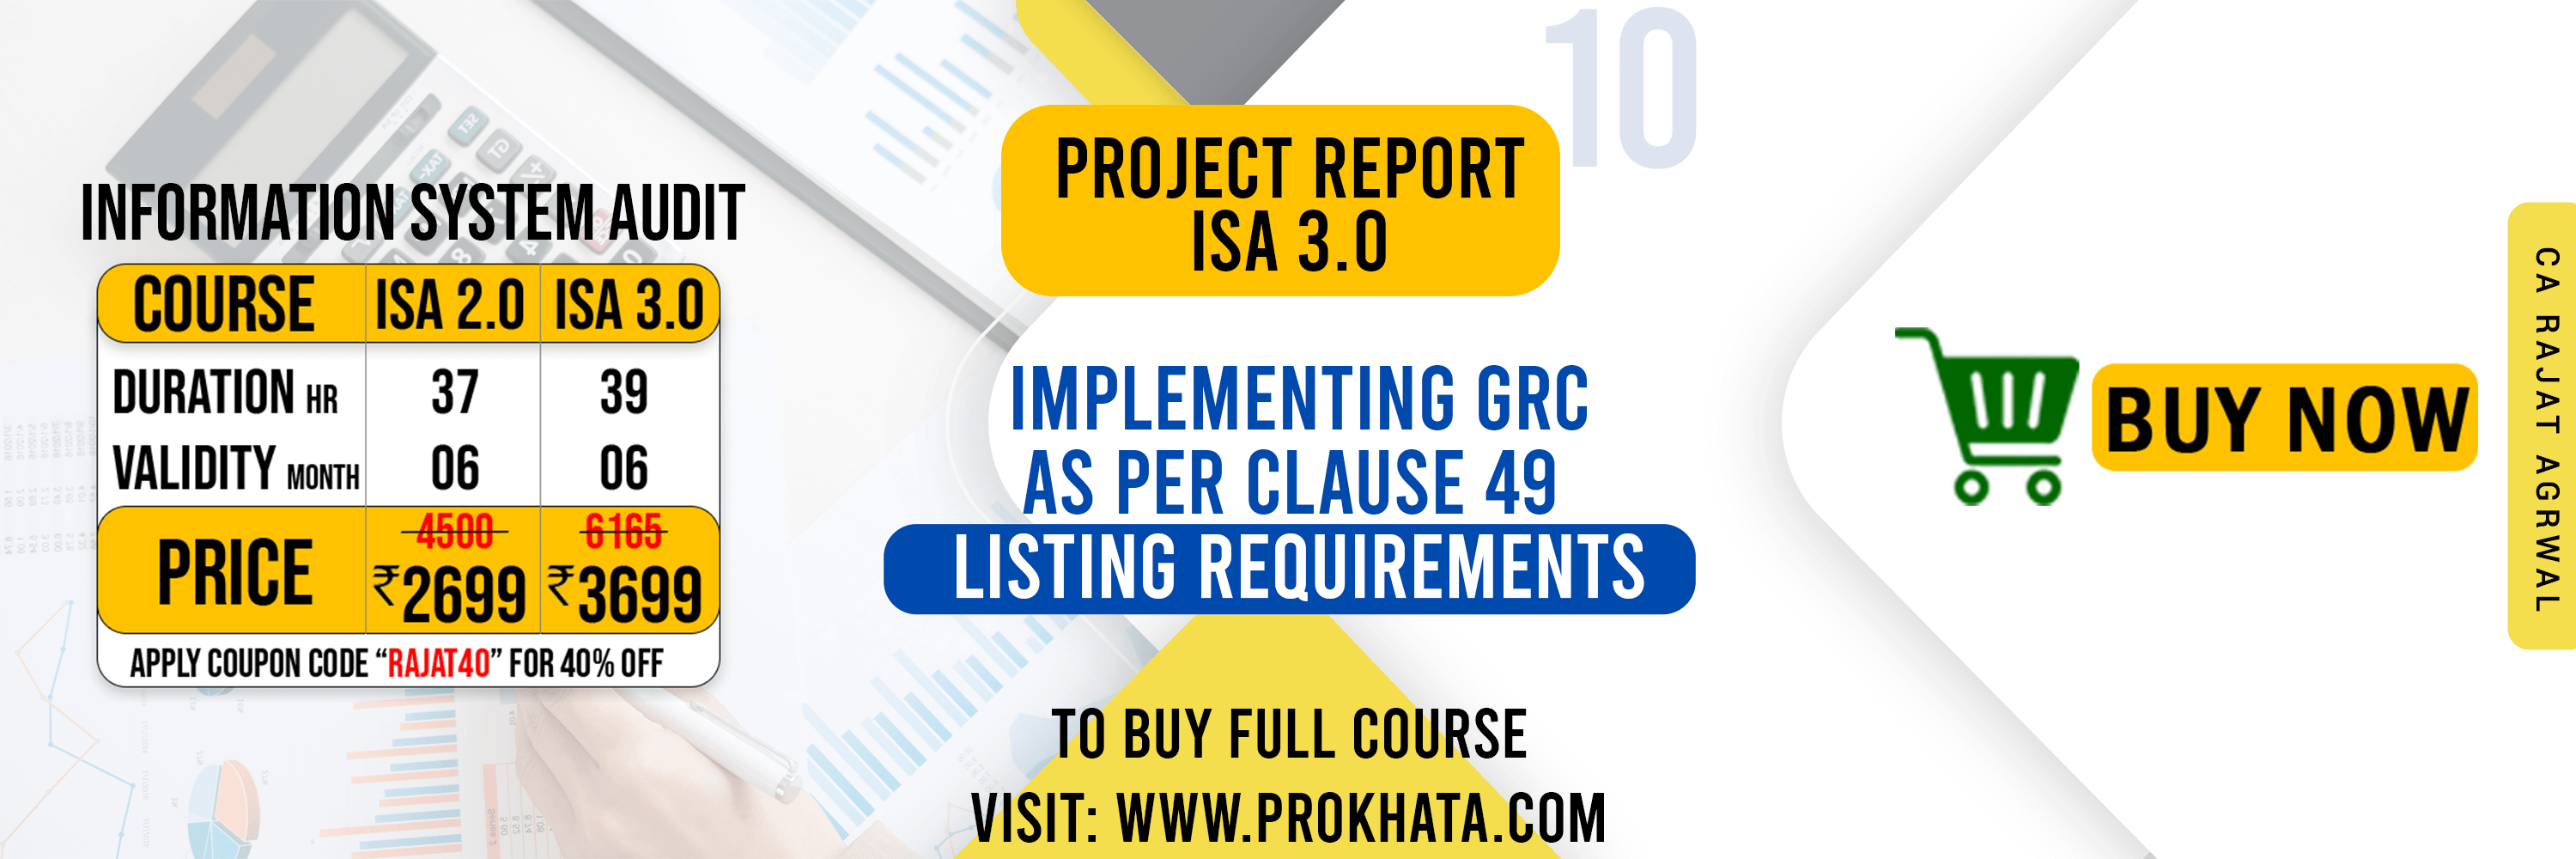 Project Report 10 IMPLEMENTING GRC AS PER CLAUSE 49 LISTING REQUIREMENTS